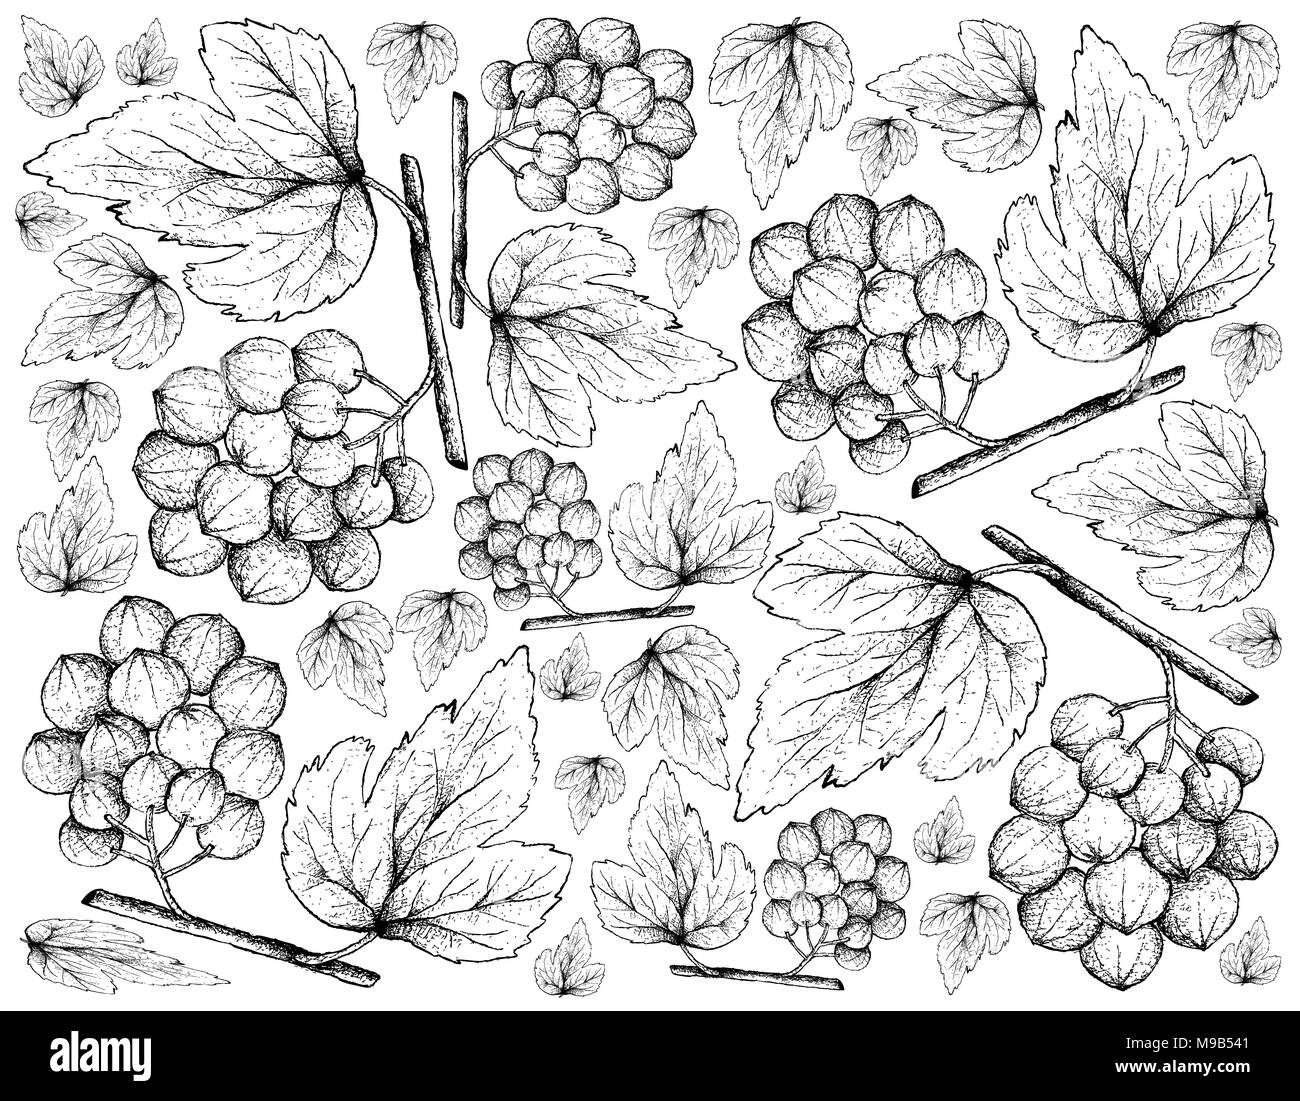 Berry Fruit, Illustration Wallpaper Background of Hand Drawn Sketch of Ampelocissus Latifolia Fruits. Stock Photo